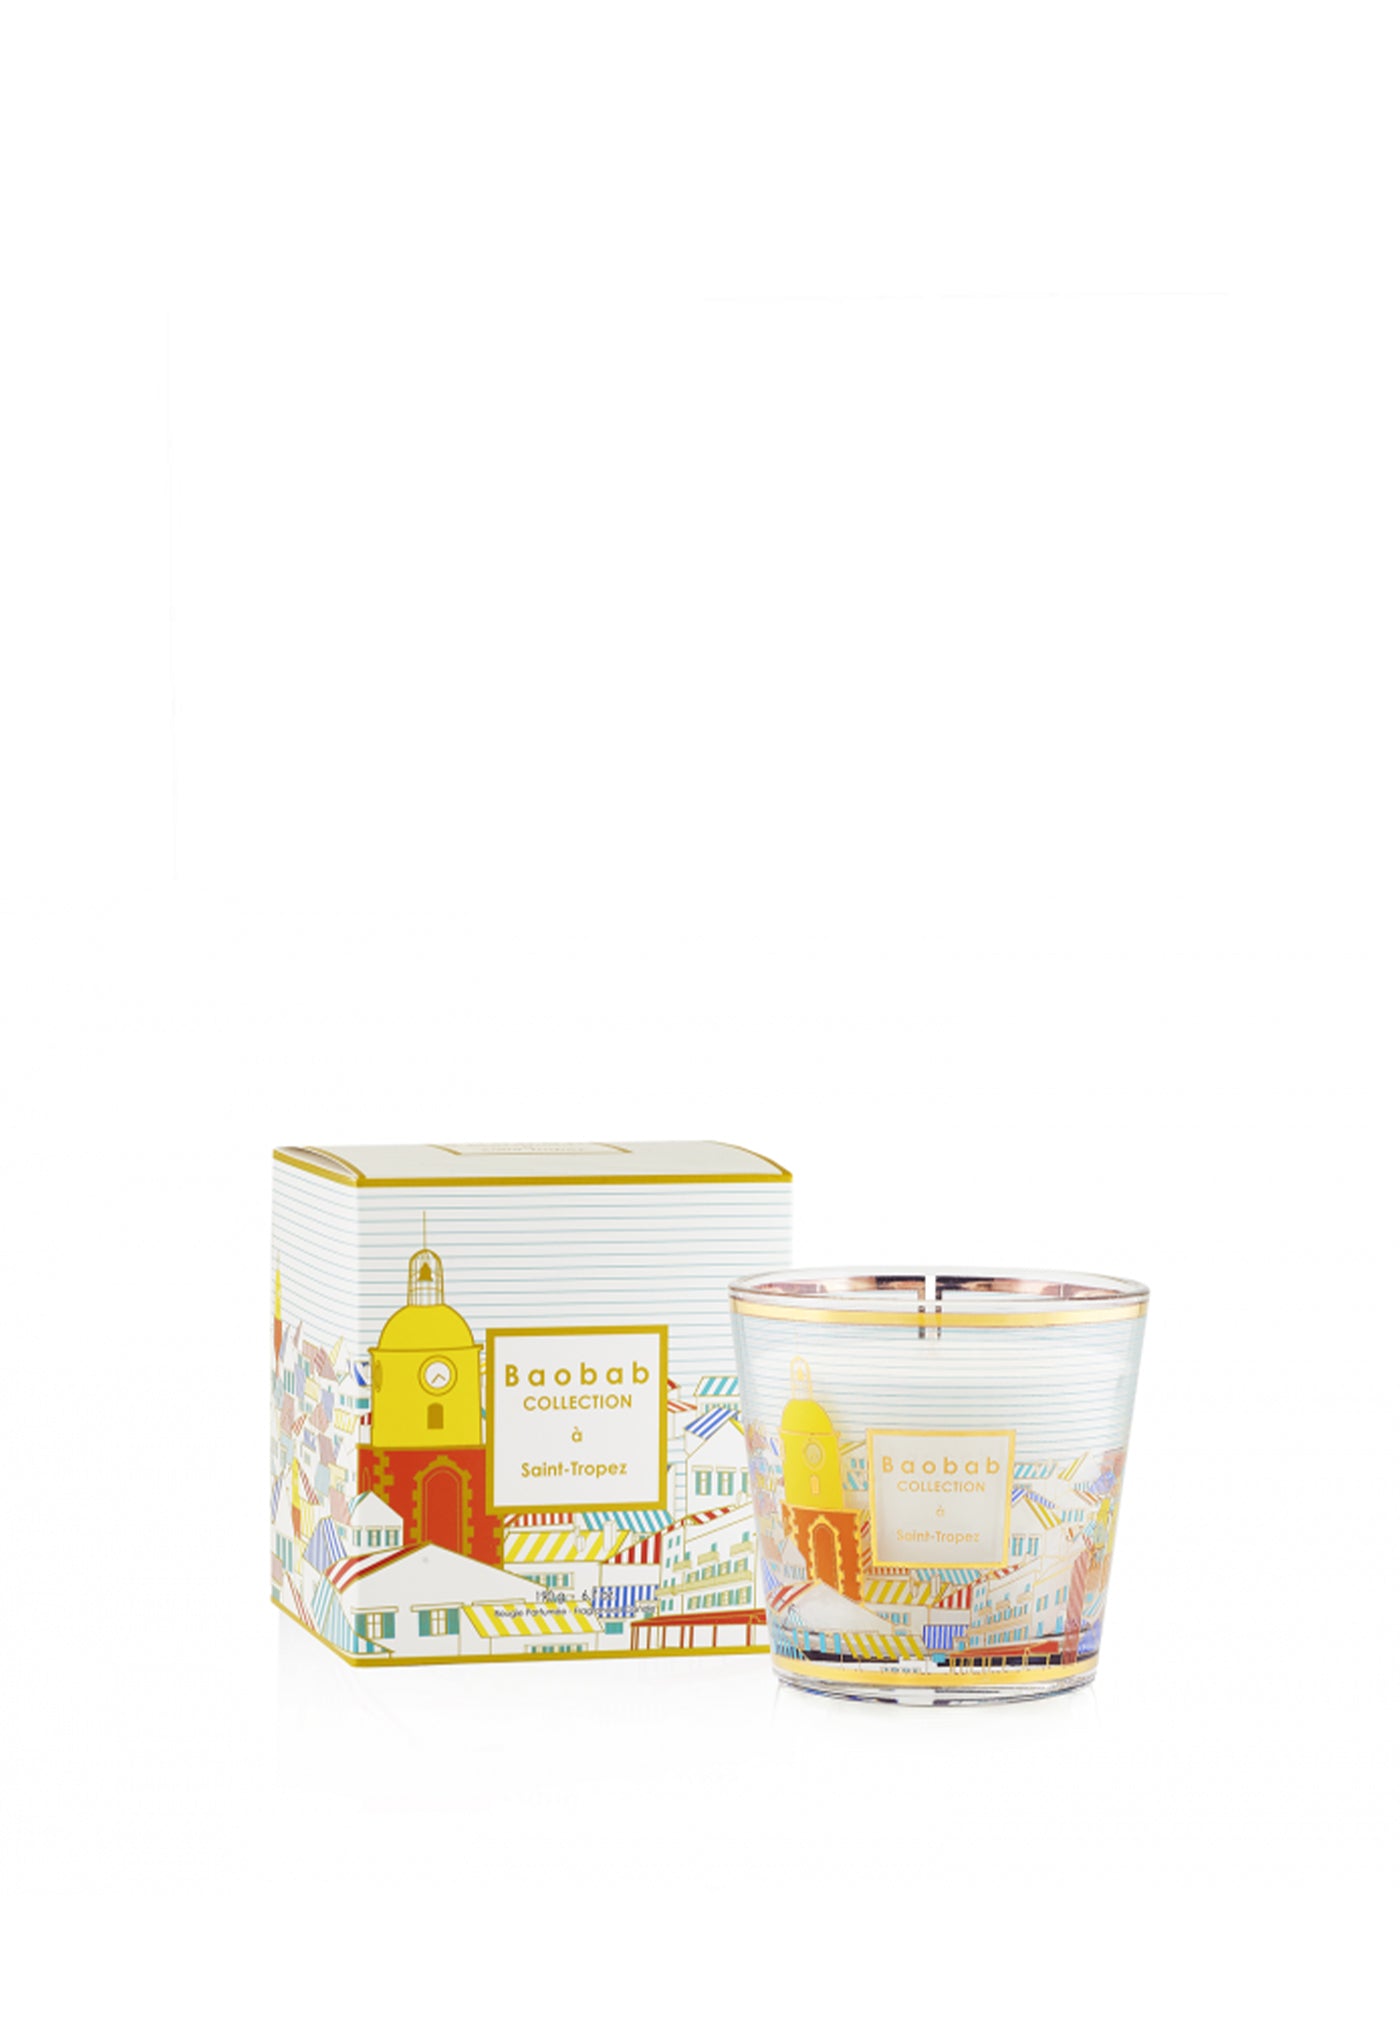 My First Baobab Candle - St Tropez sold by Angel Divine